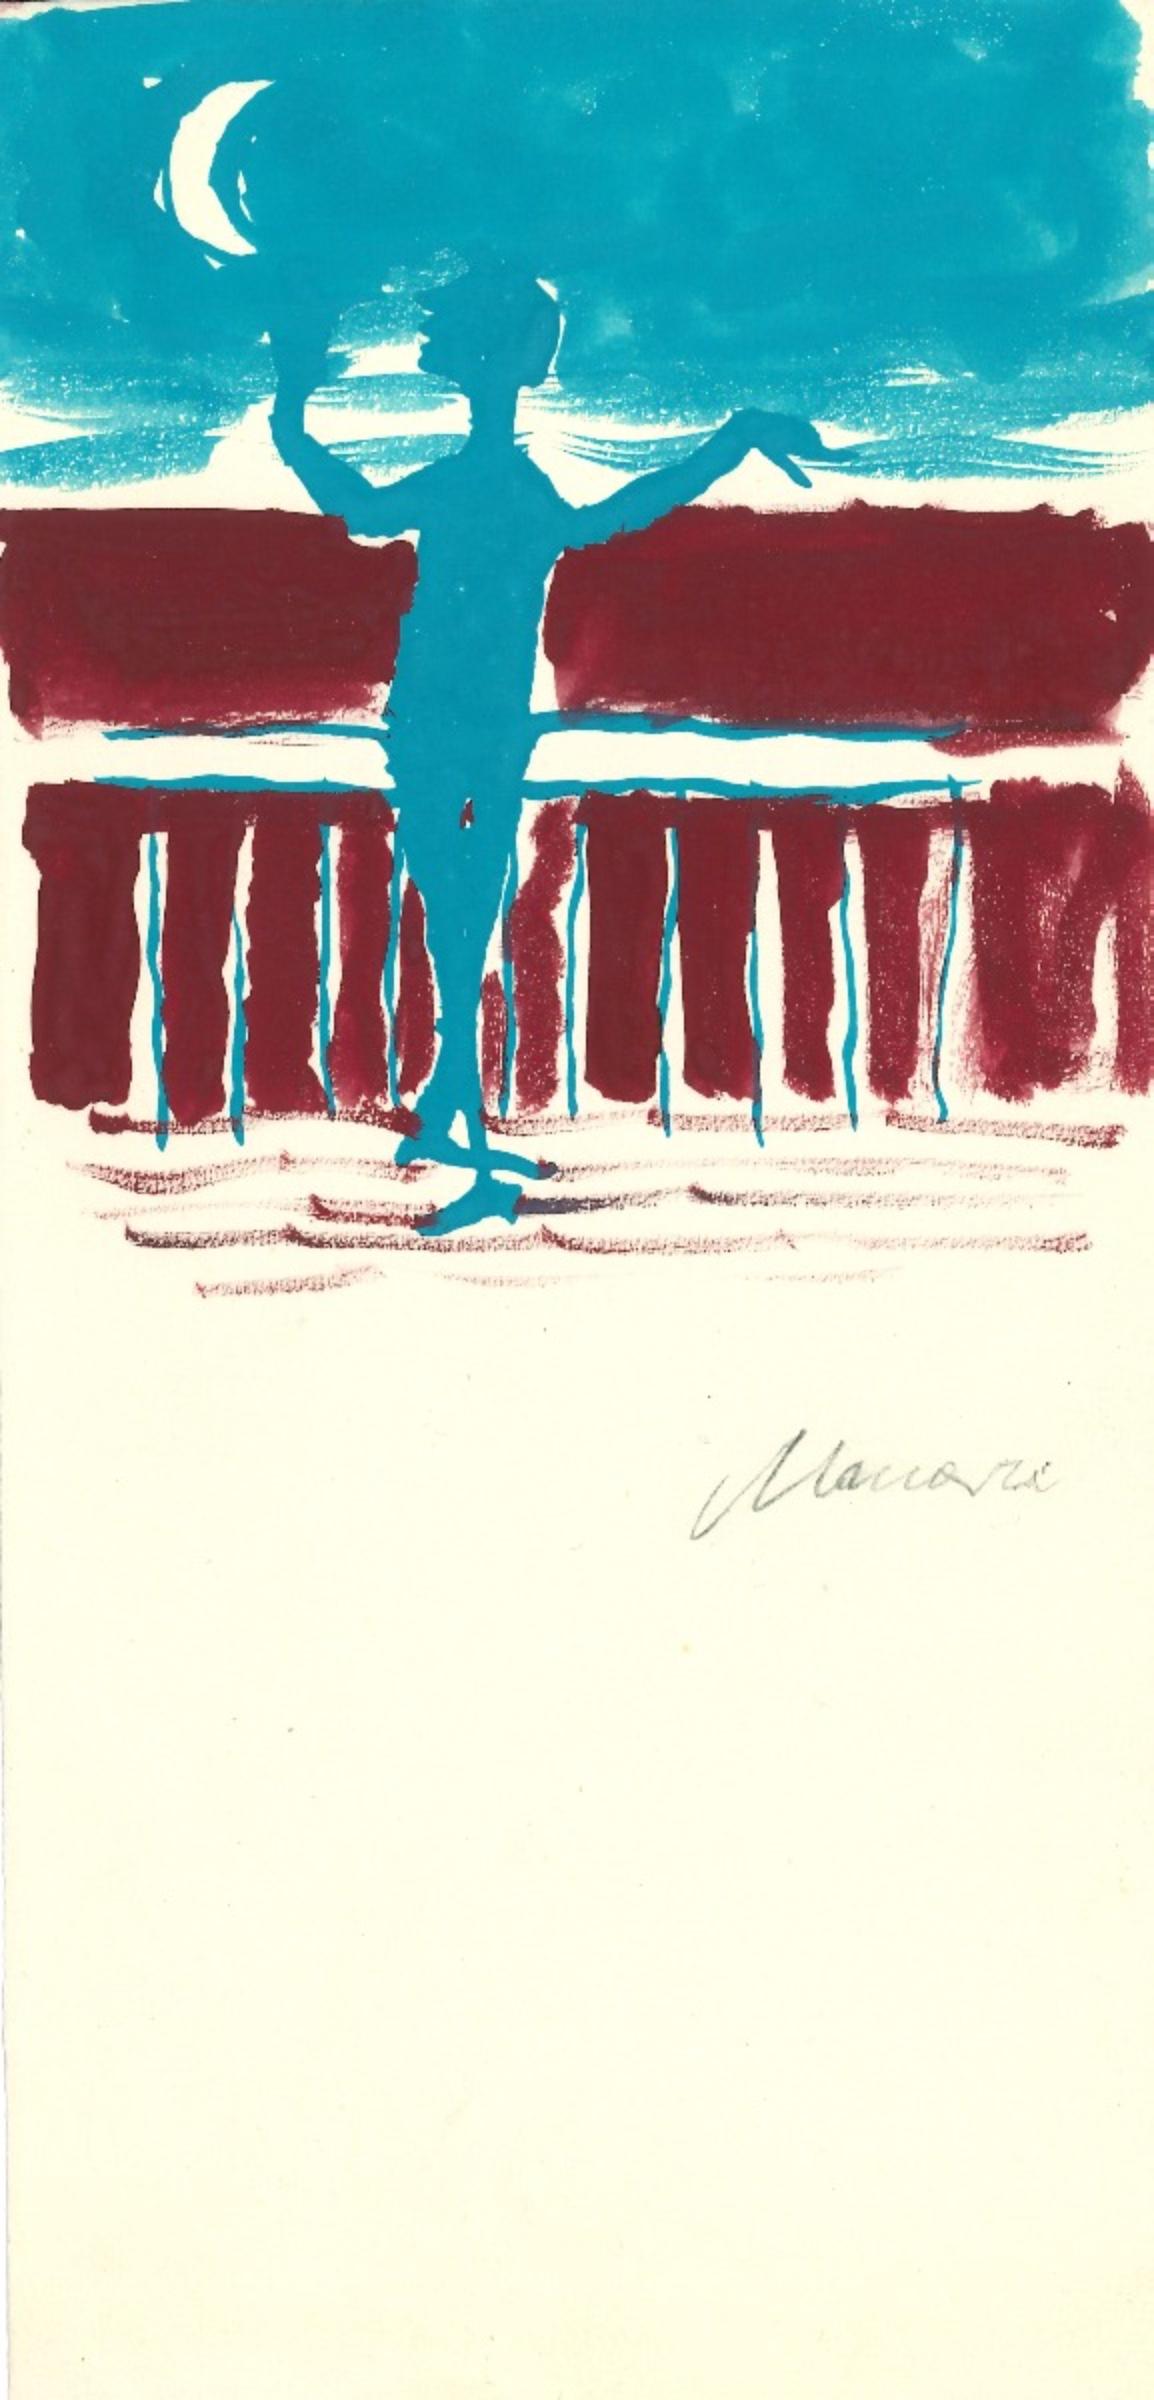 Advertisement for Tirreno is an original artwork realized by Mino Maccari in the 1970's.

Colored mixed media drawing on cardboard.

Hand-signed by the artist on the lower margin. 

The artwork is a little sketch for the famous periodic Il